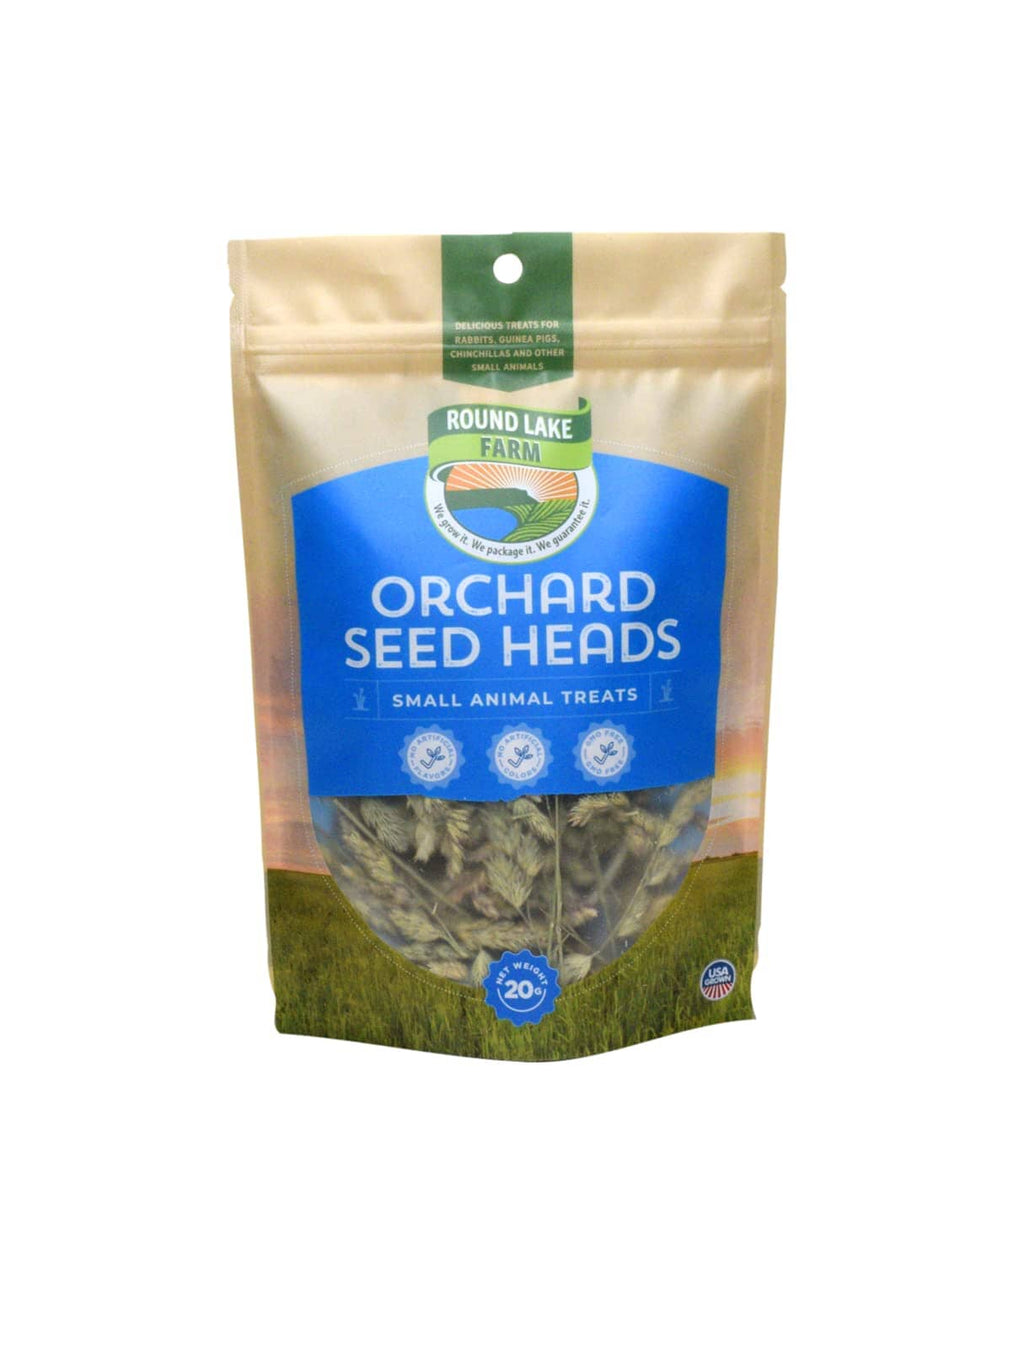 Round Lake Farms Orchard Seed Heads Small Animal Treats 20 g 